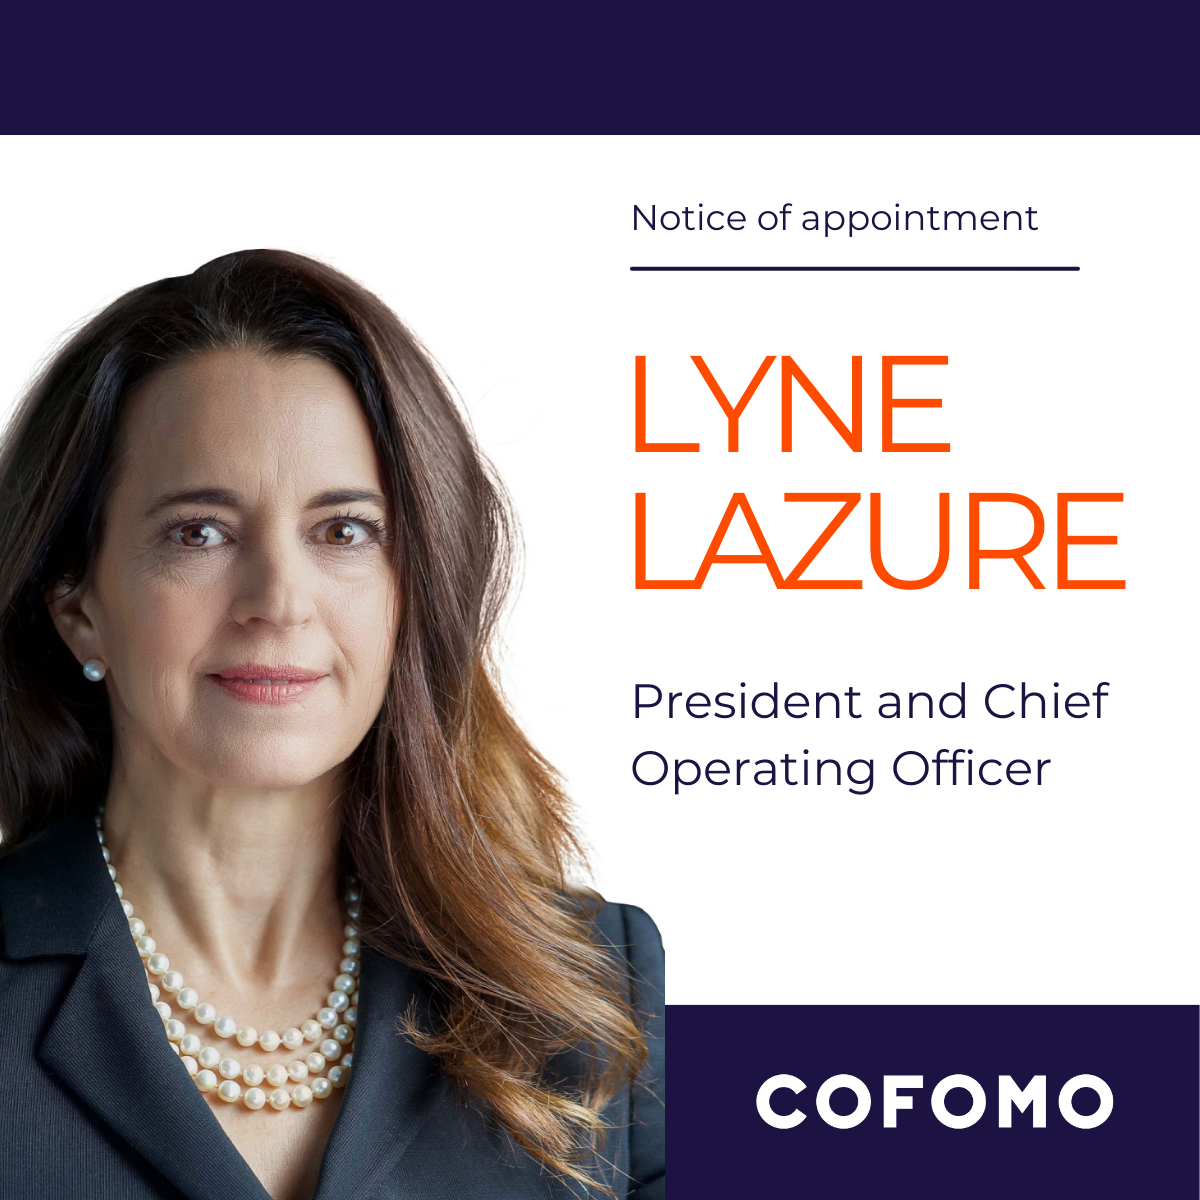 Lyne Lazure Appointed President and Chief Operating Officer at Cofomo